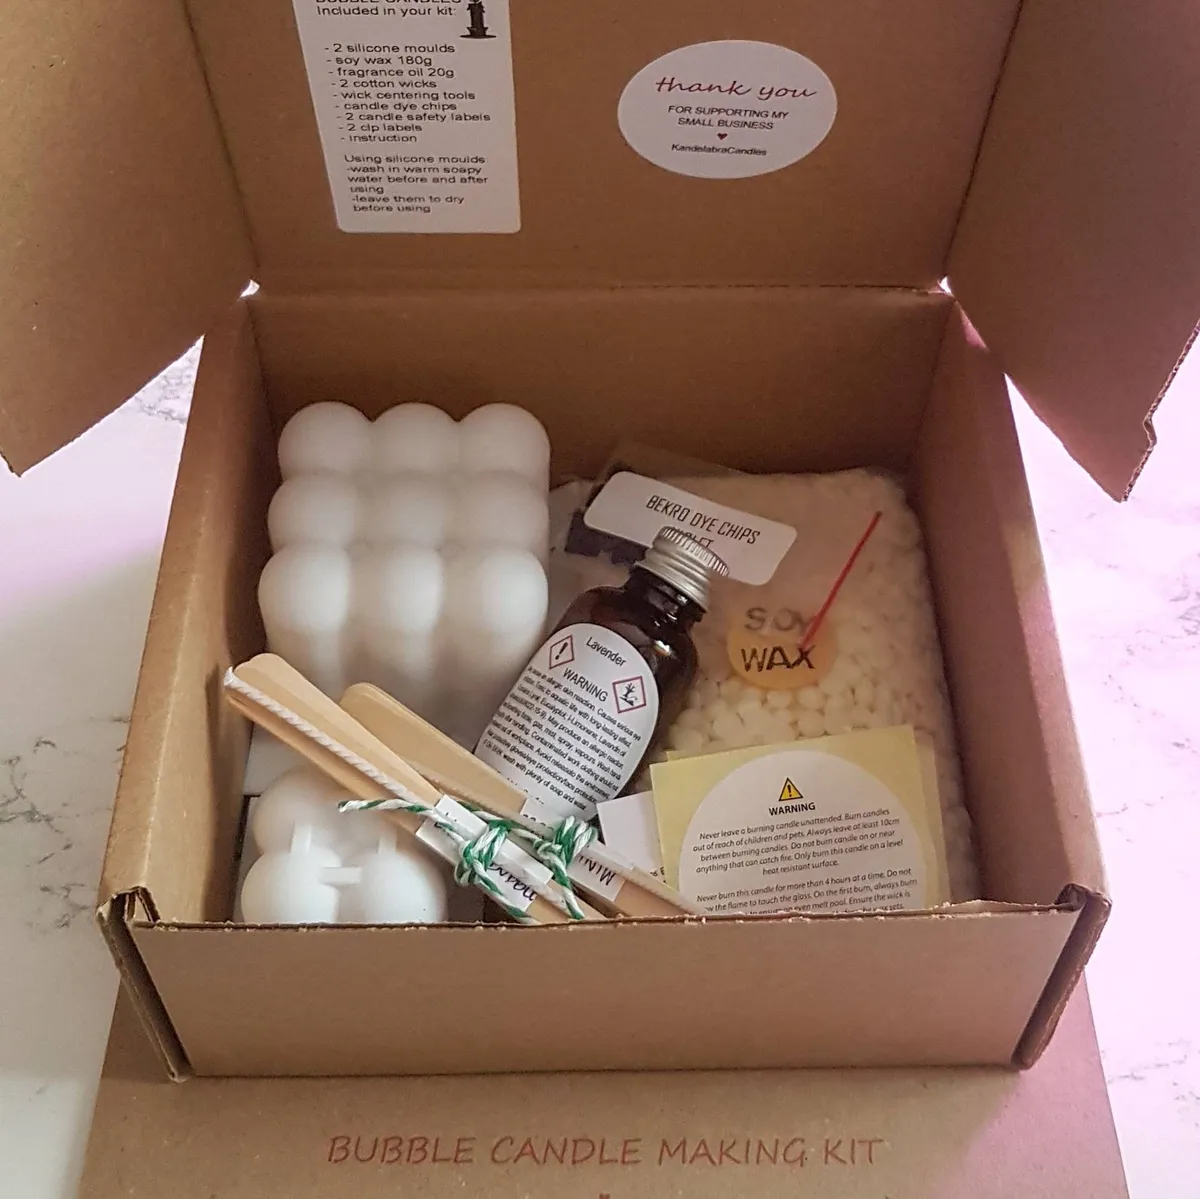 Candle Making Kit, Deluxe Candle Making Supplies, DIY Gifts for